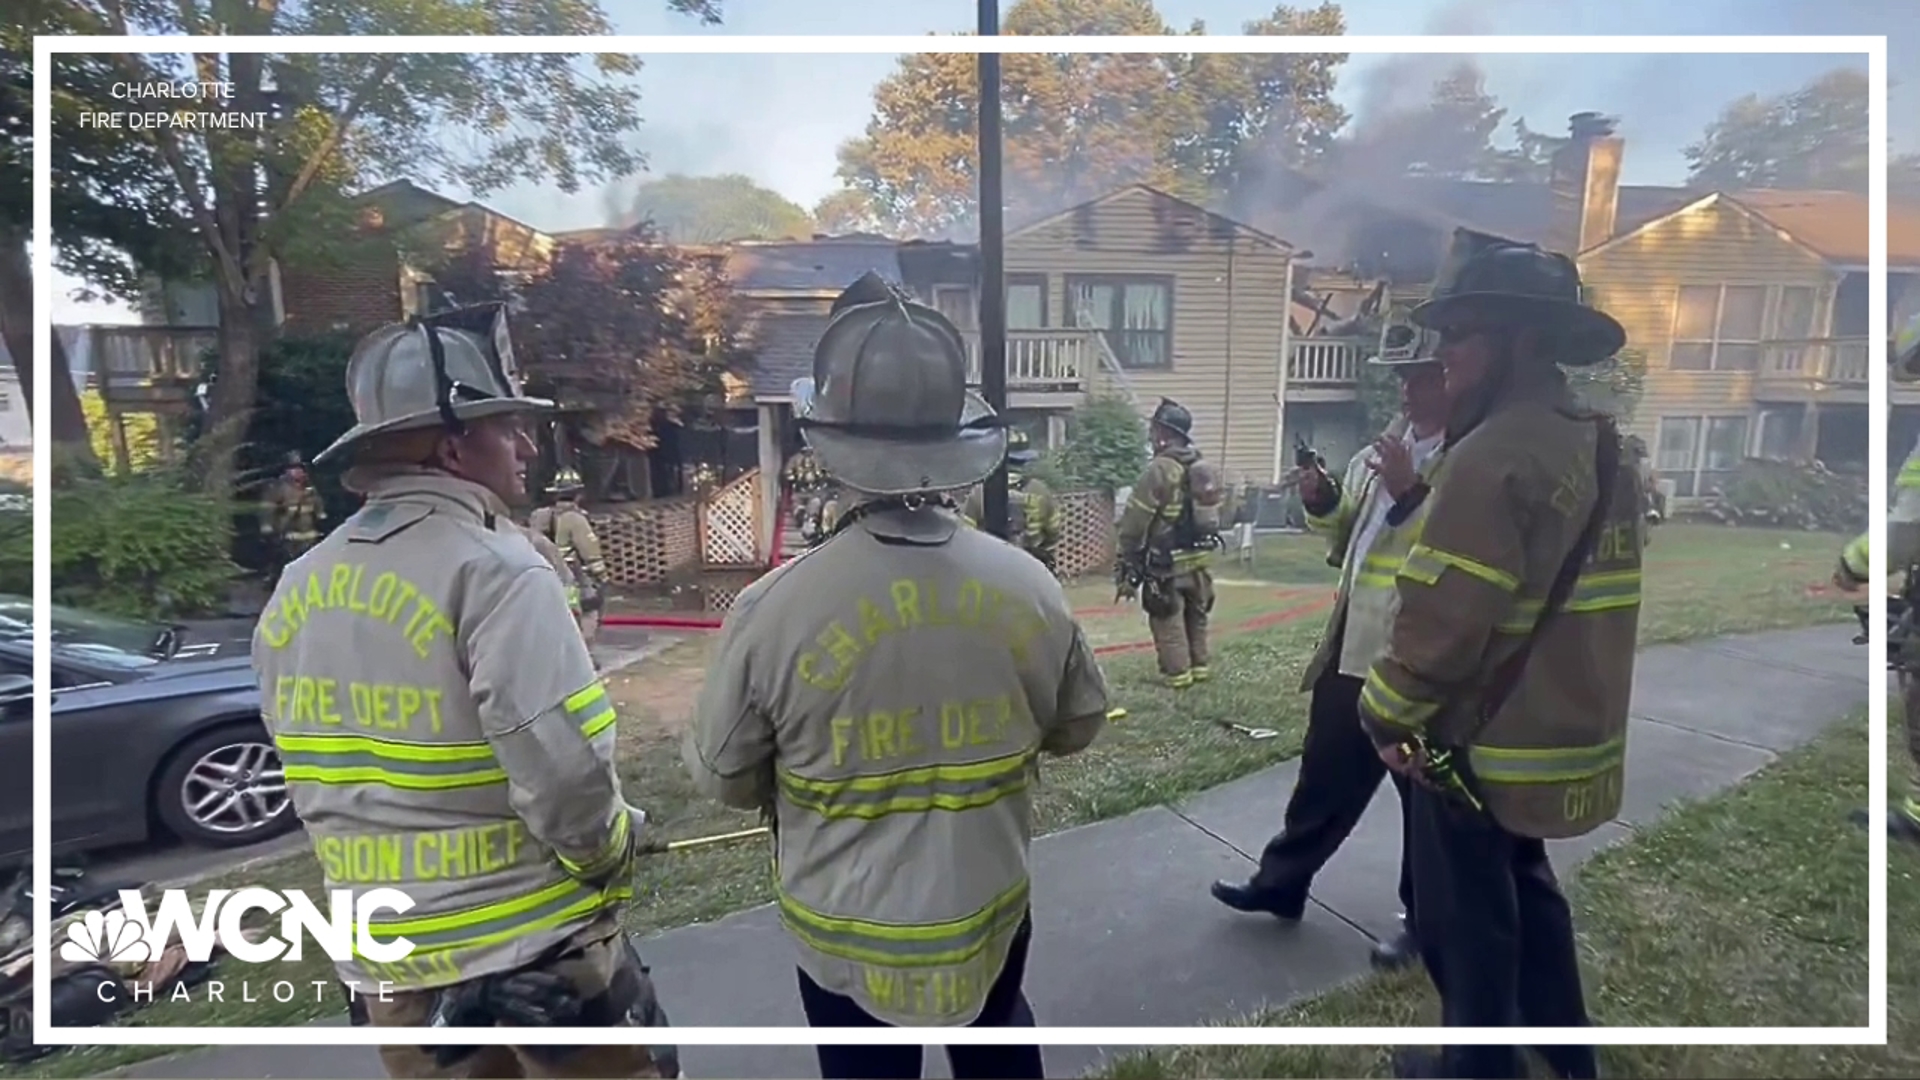 The 2-alarm fire happened at the Sharon Place Condominiums Friday evening.